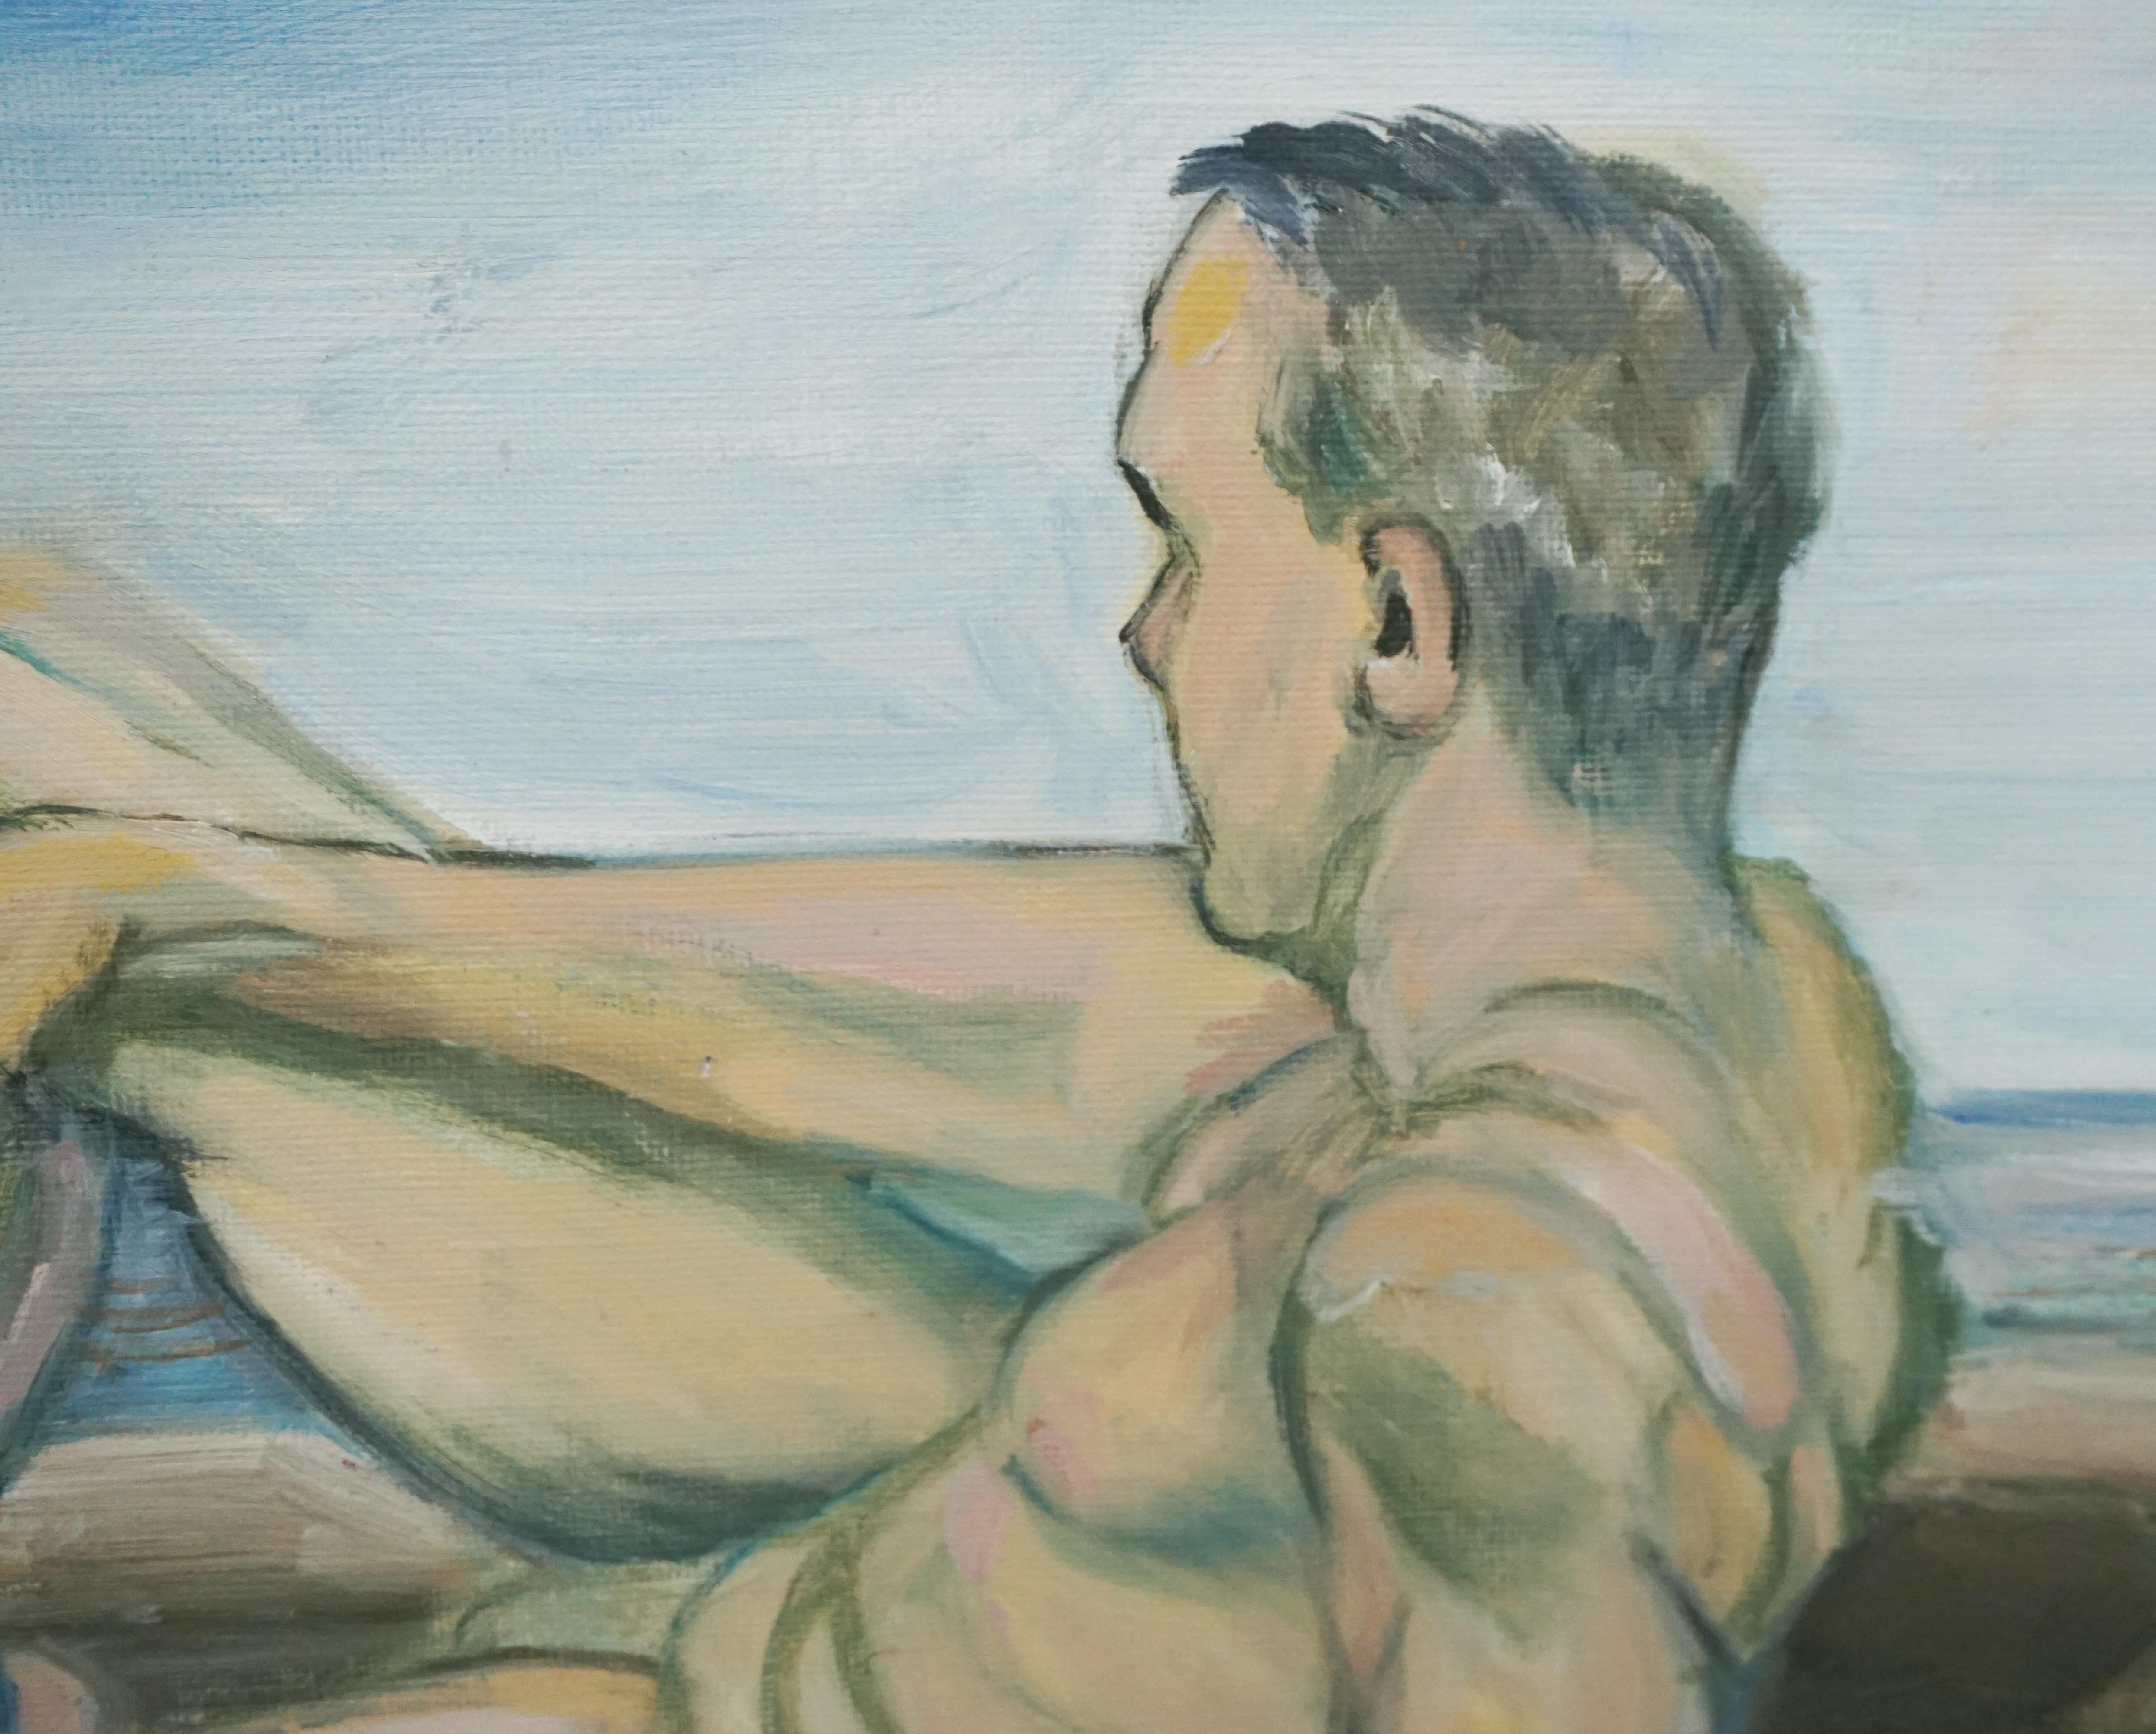 Male Nude at the Beach Carmel  - Painting by Unknown